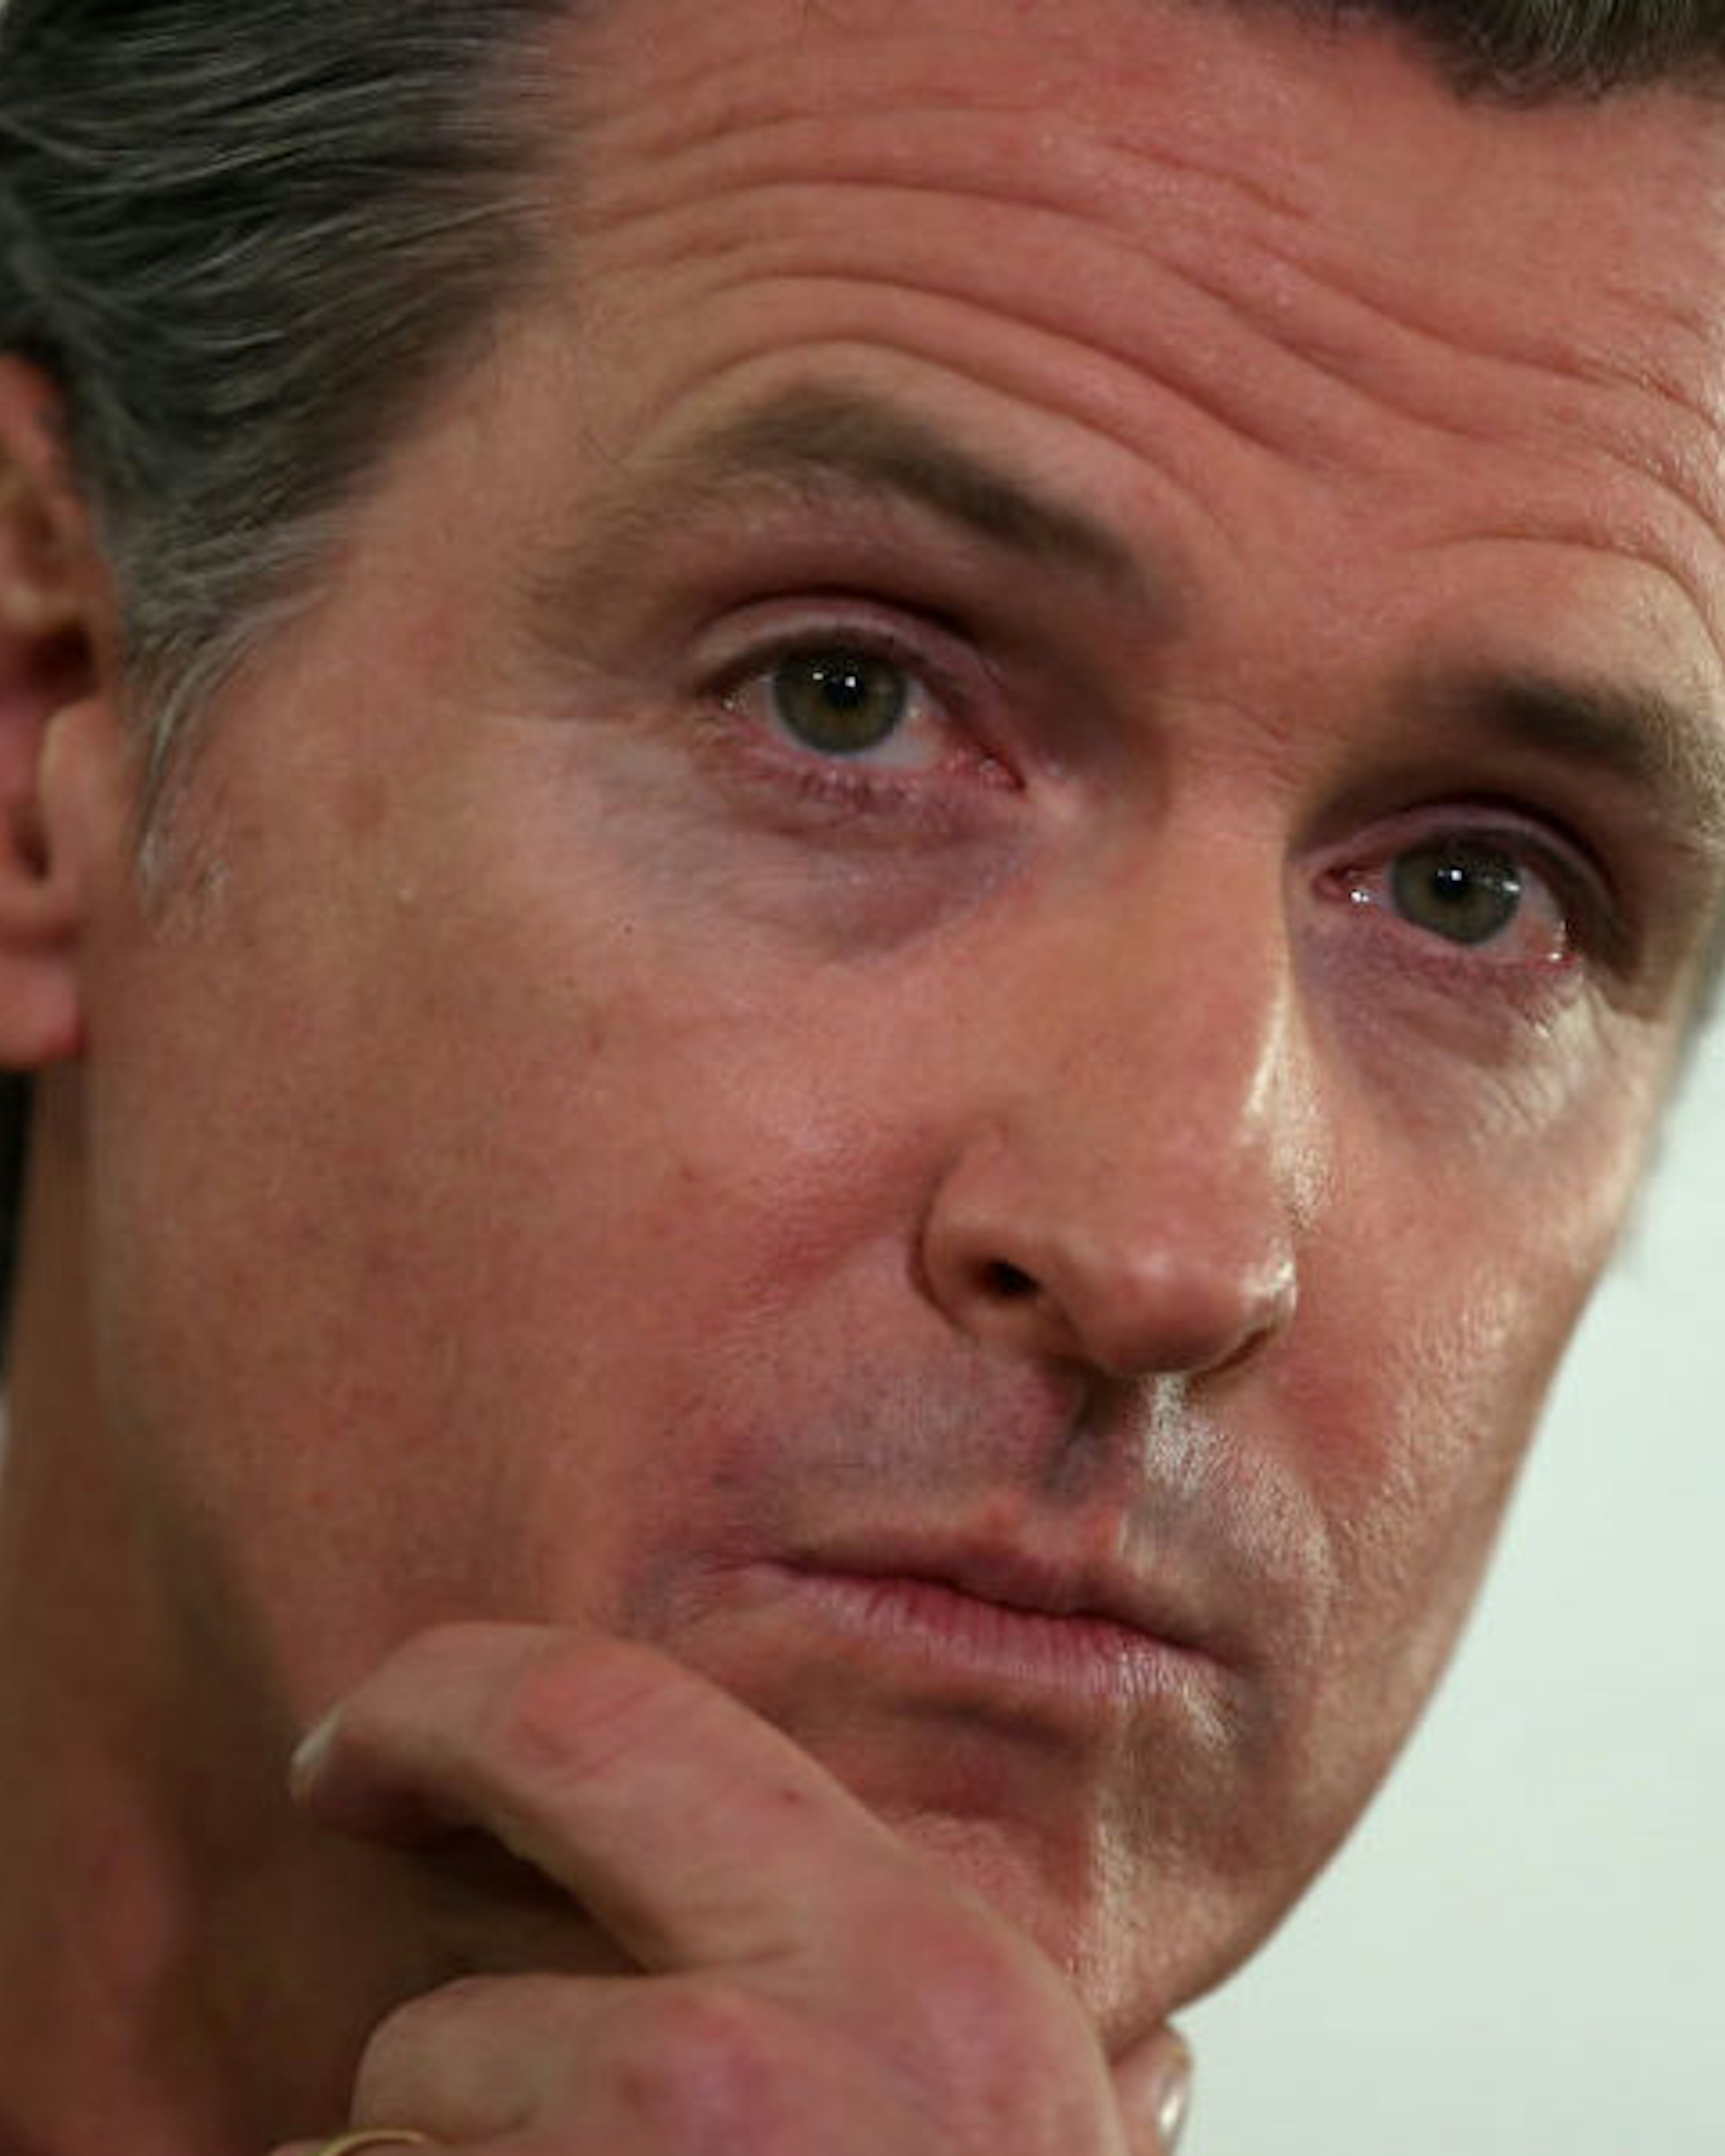 OAKLAND, CALIFORNIA - JANUARY 16: California Gov. Gavin Newsom looks on during a a news conference about the state's efforts on the homelessness crisis on January 16, 2020 in Oakland, California. Newsom was joined by Oakland Mayor Libby Schaaf to announce that Oakland will receive 15 unused FEMA trailers for the city to use as temporary housing and as mobile health and social services clinics for the homeless. Newsom signed on executive order on January 8 to deploy 100 trailers and crisis response teams to areas in need across the state.